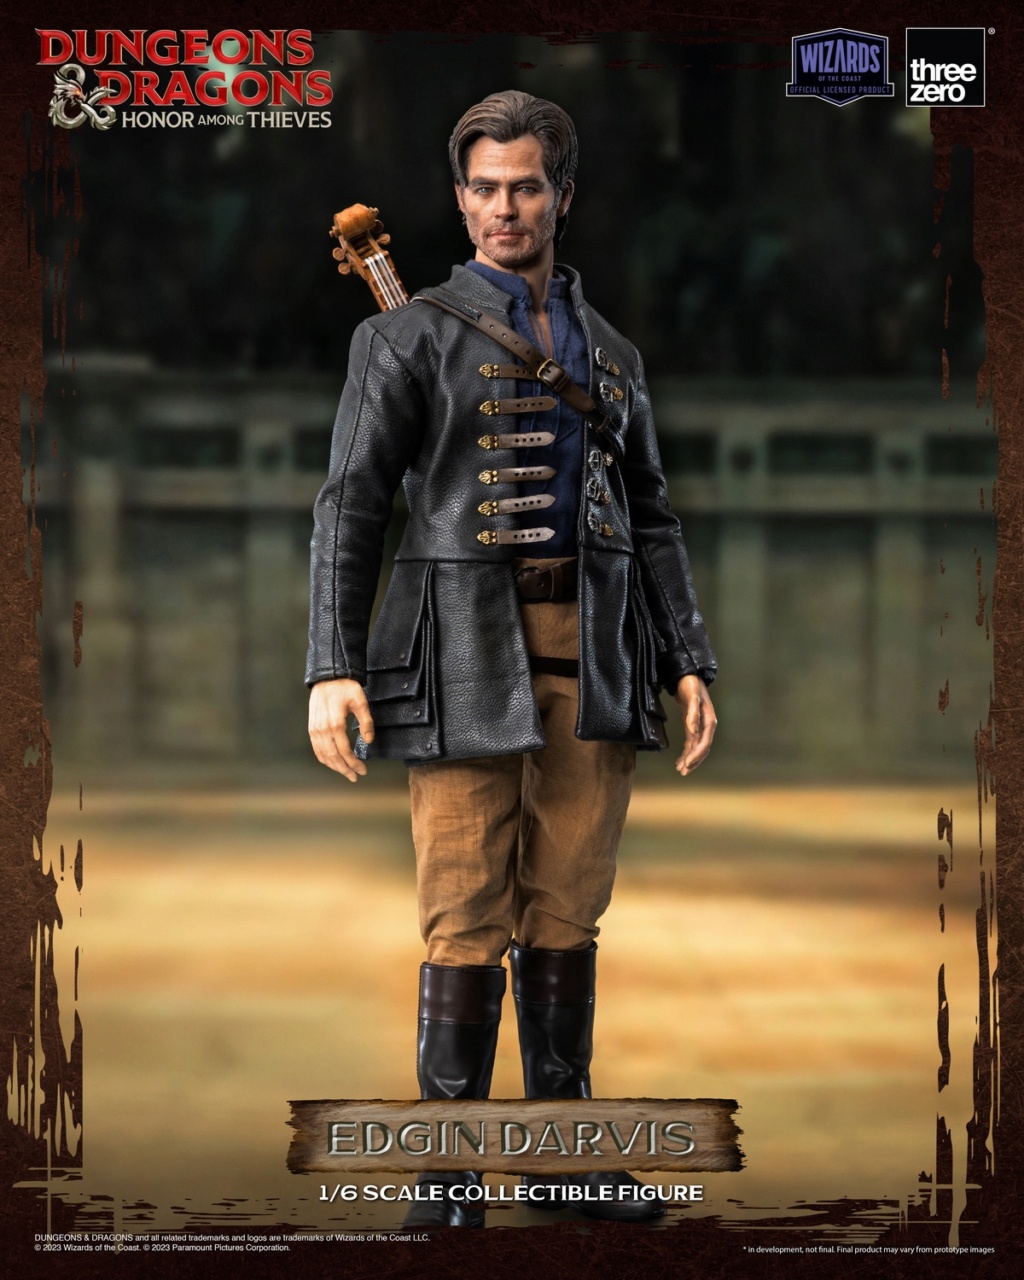 EdginDarvis - NEW PRODUCT: Threezero: 1/6 scale Edgin Darvis - Dungeons & Dragons: Honor Among Thieves action figure 16542010